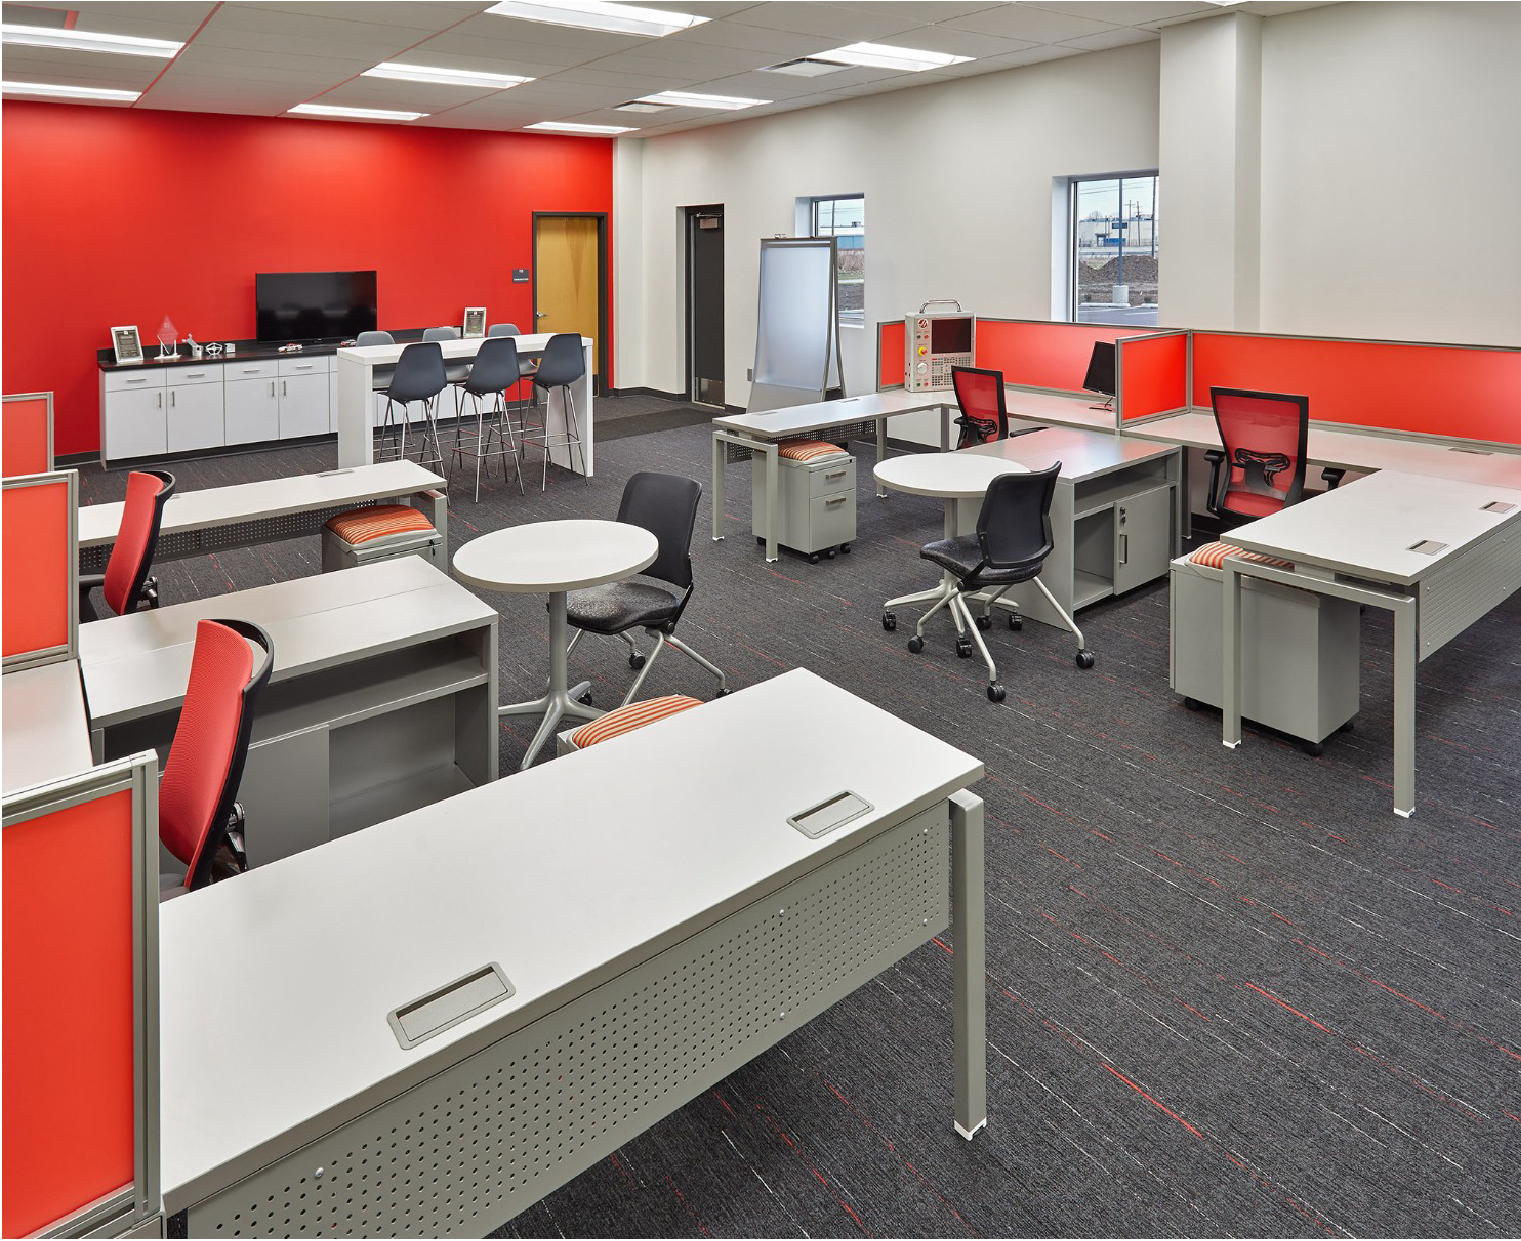 A room displaying a variety of desking and bench solutions.